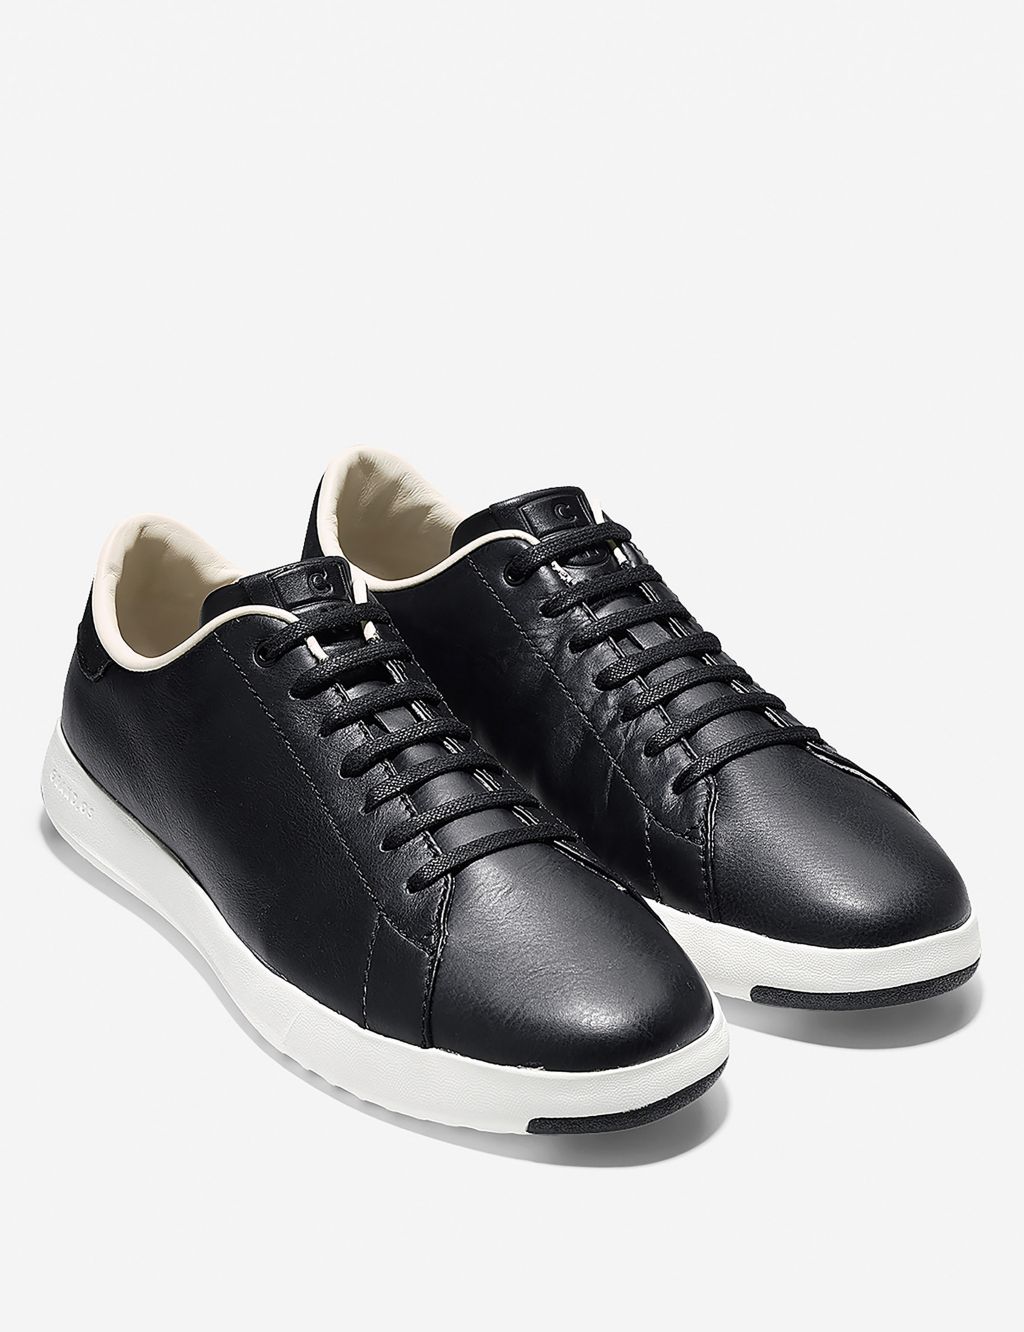 Grandpro Leather Lace Up Trainers image 2